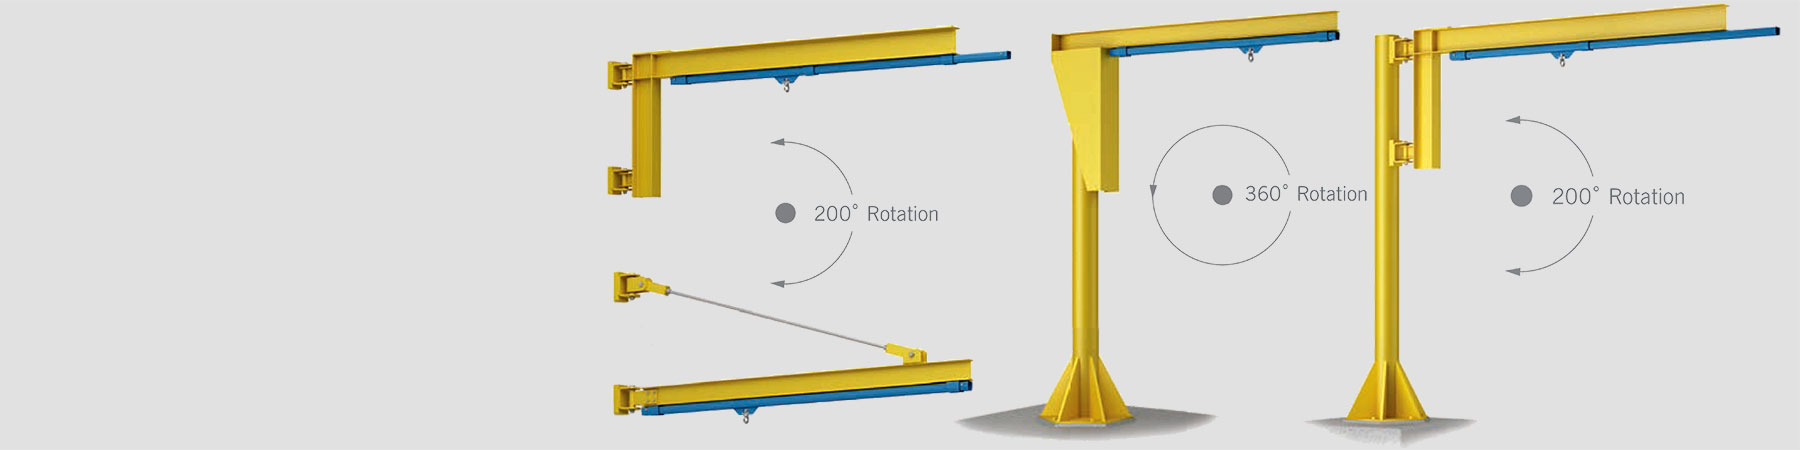 Swing-Arm Fall Protection Systems